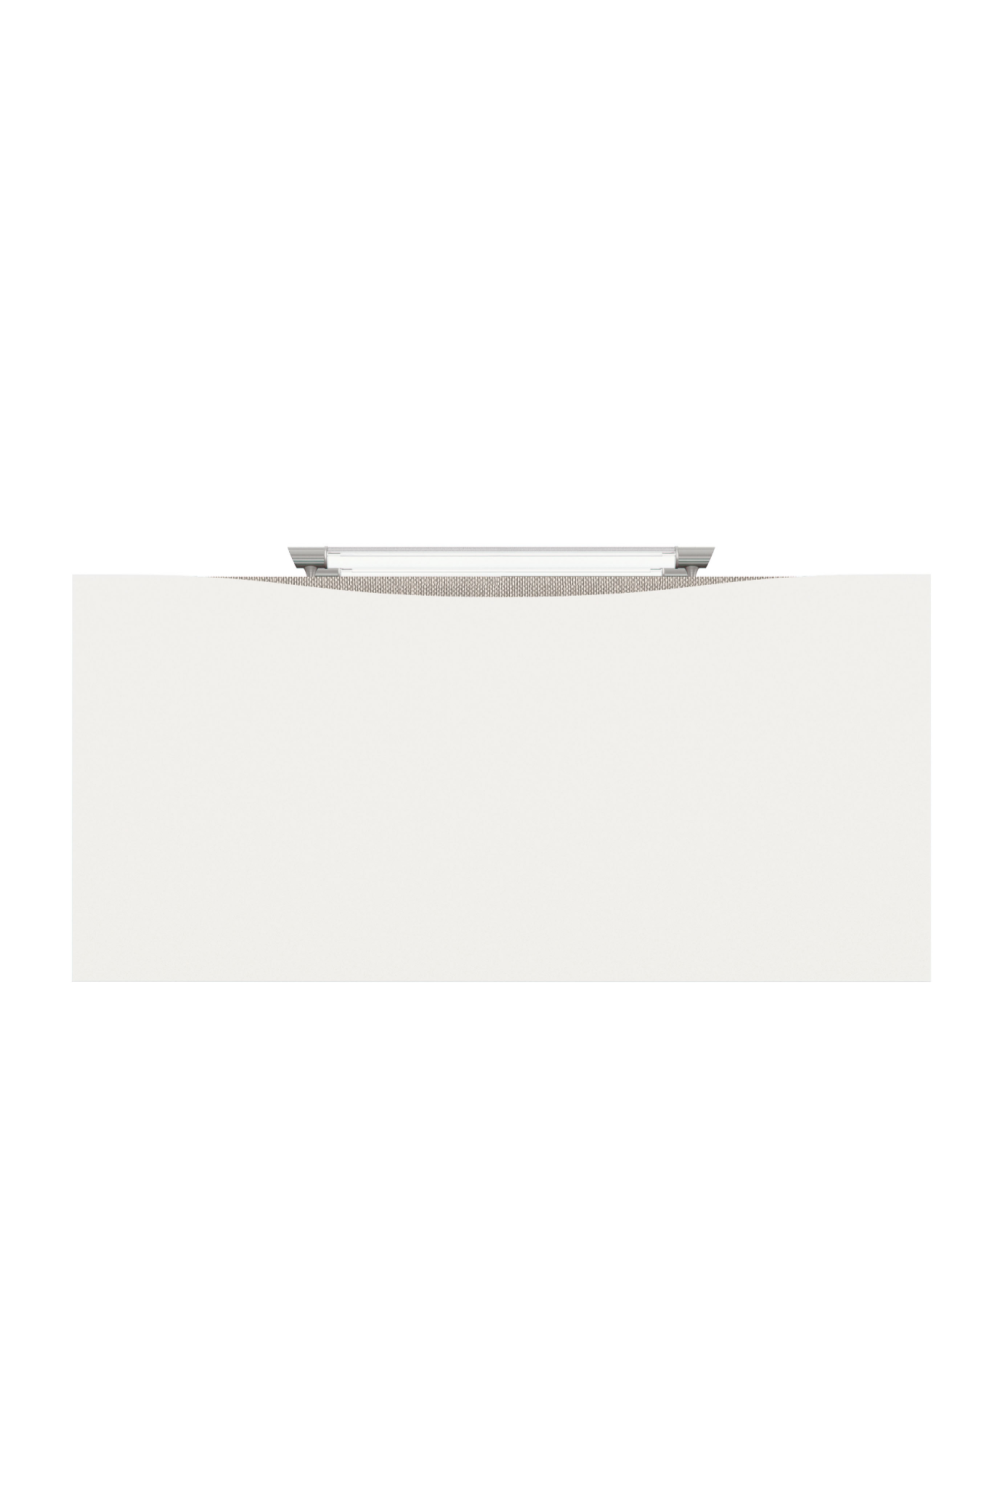 White 3-Drawer Nightstand | Caracole A Clear Touch | Oroa.com